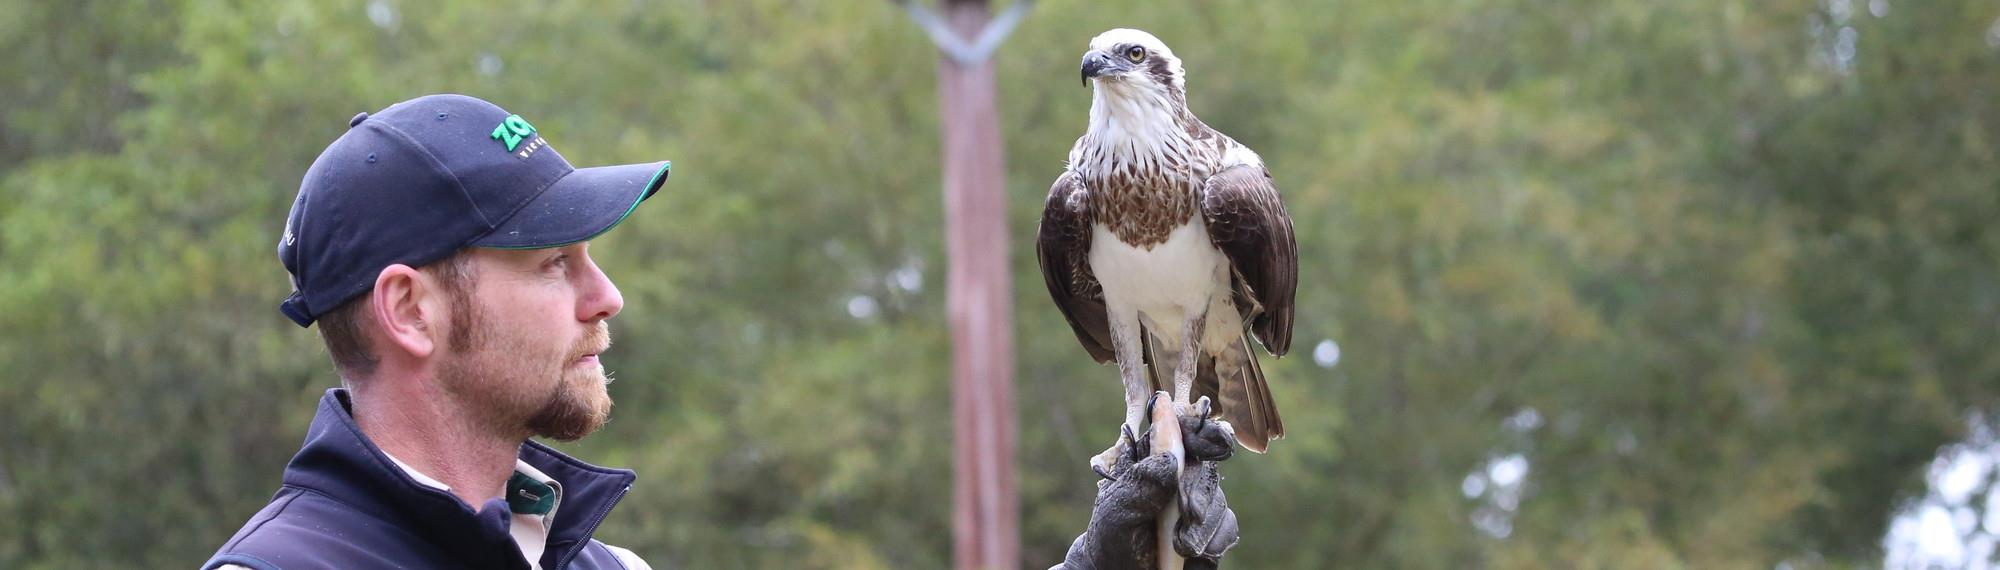 An Osprey perched on the hands of a keeper at Healesville Sanctuary.